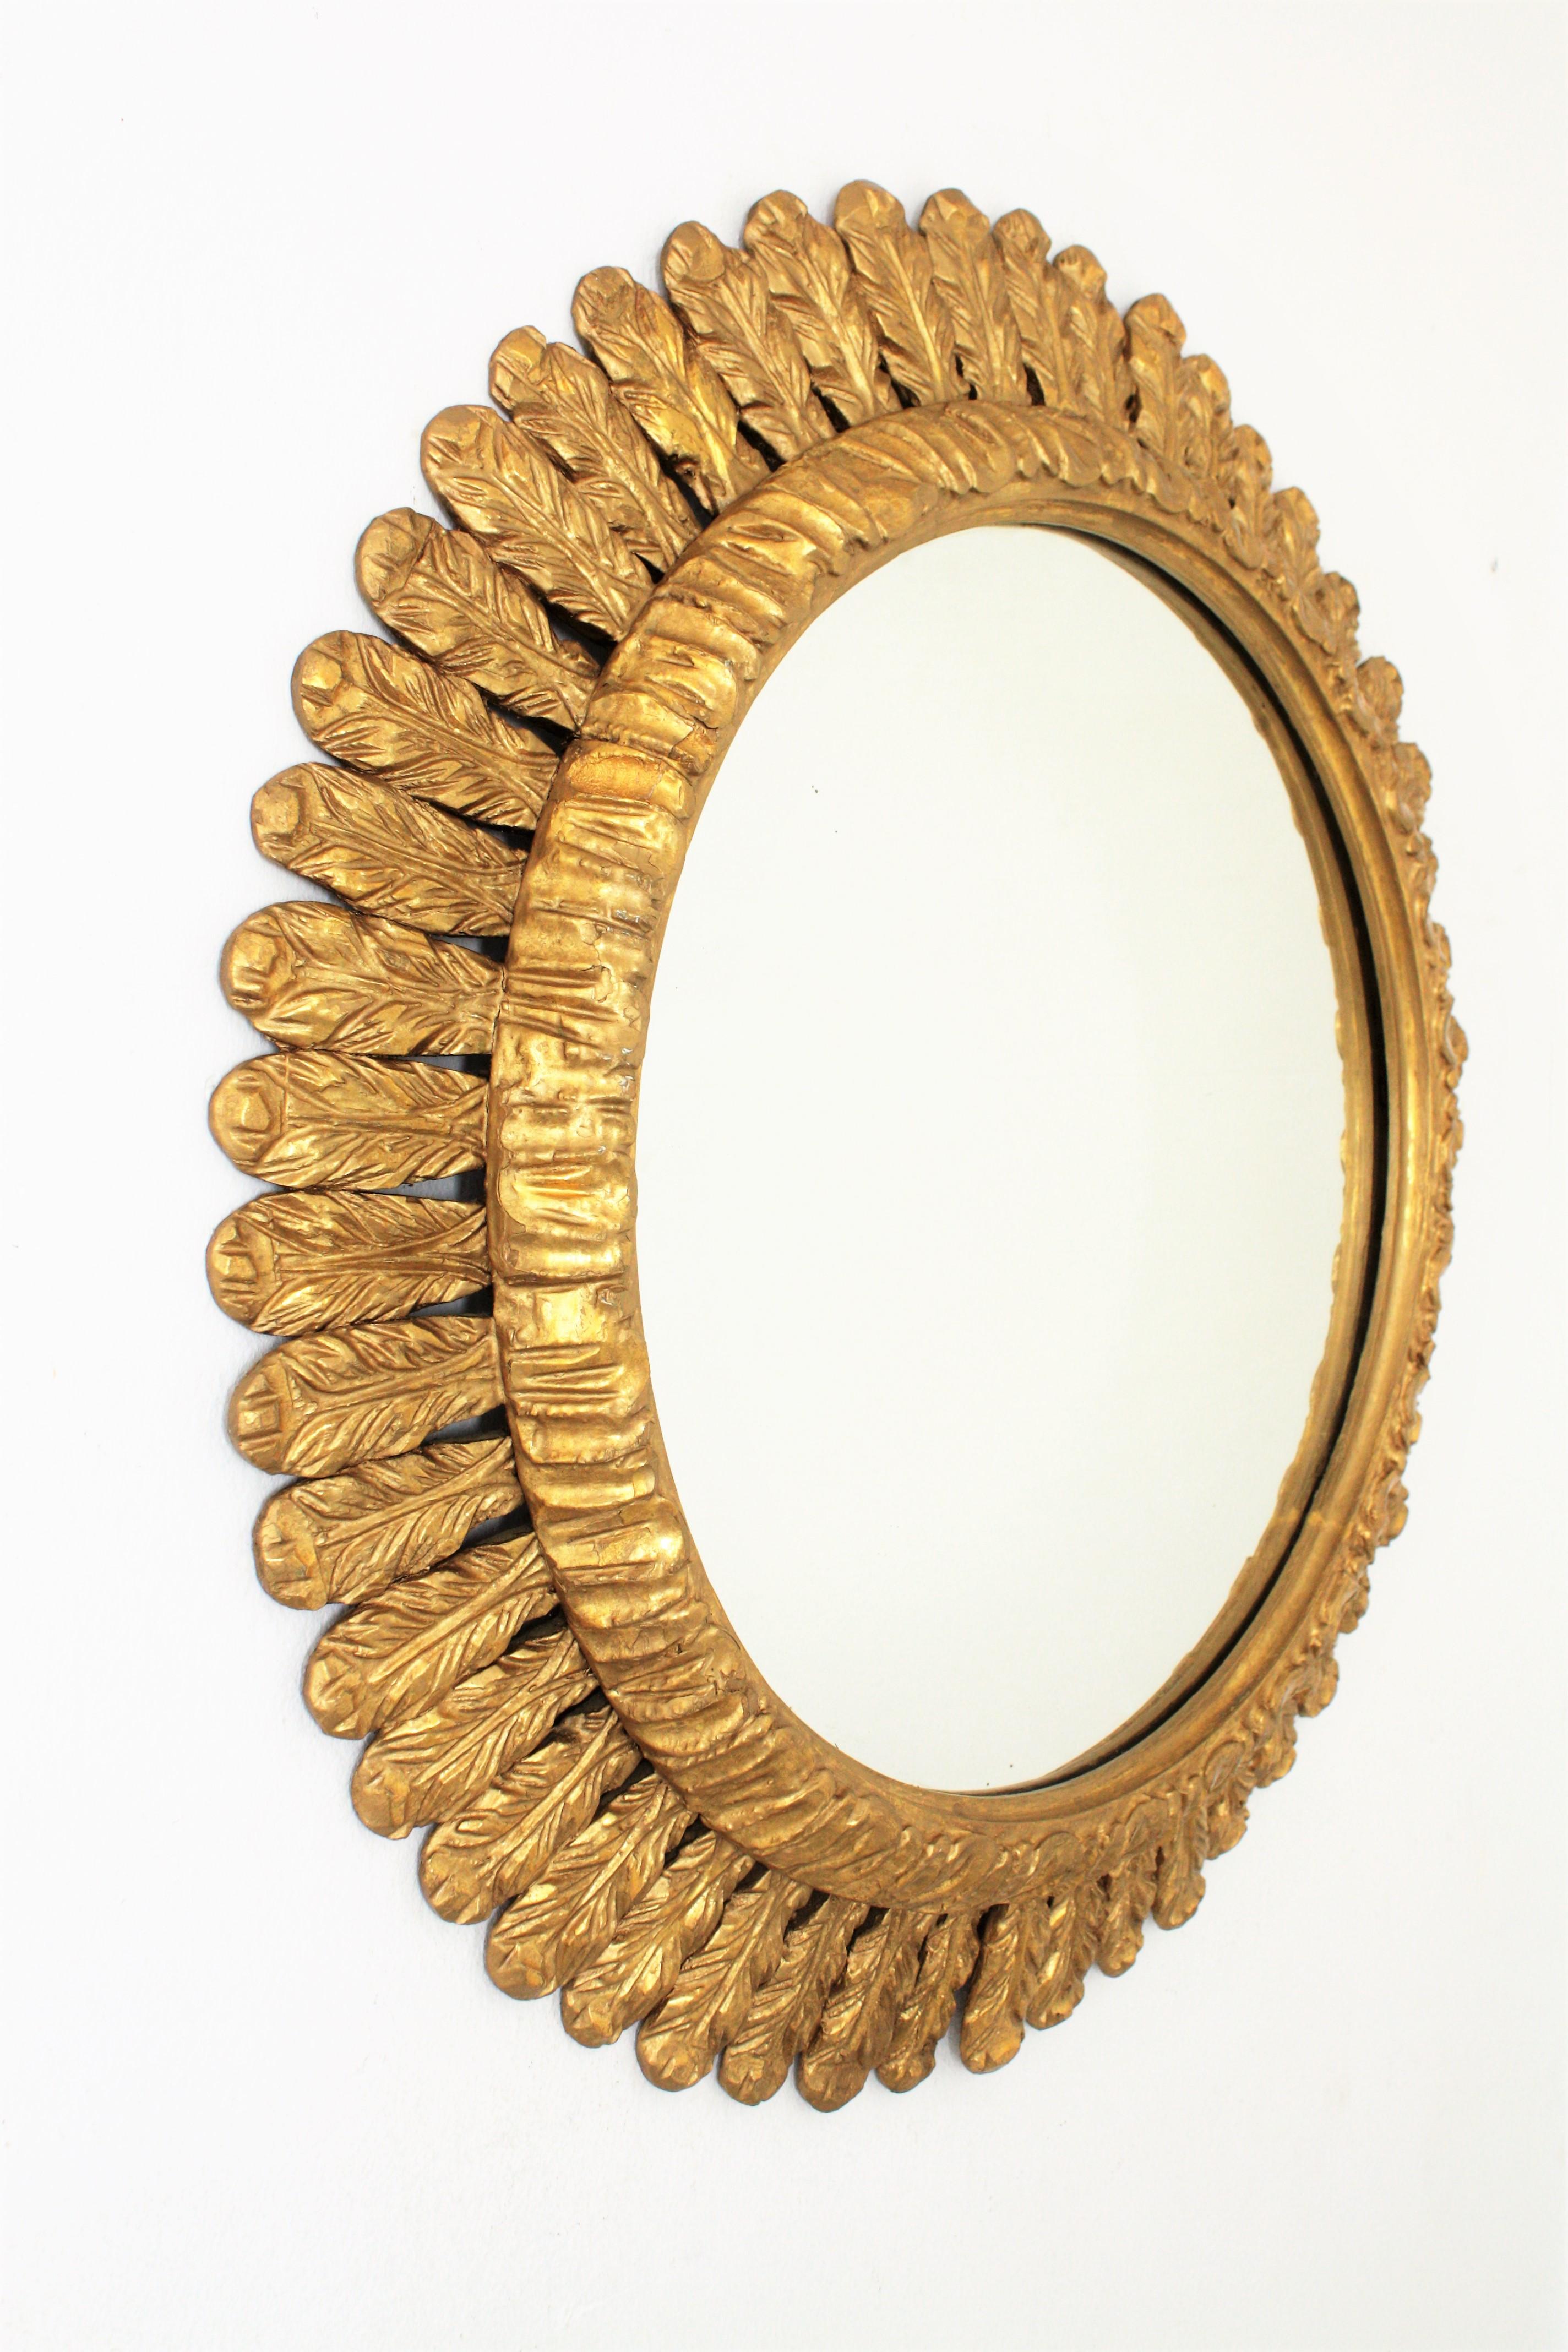 20th Century Large French Sunburst Mirror, Carved Giltwood Leafed Frame, 1950s